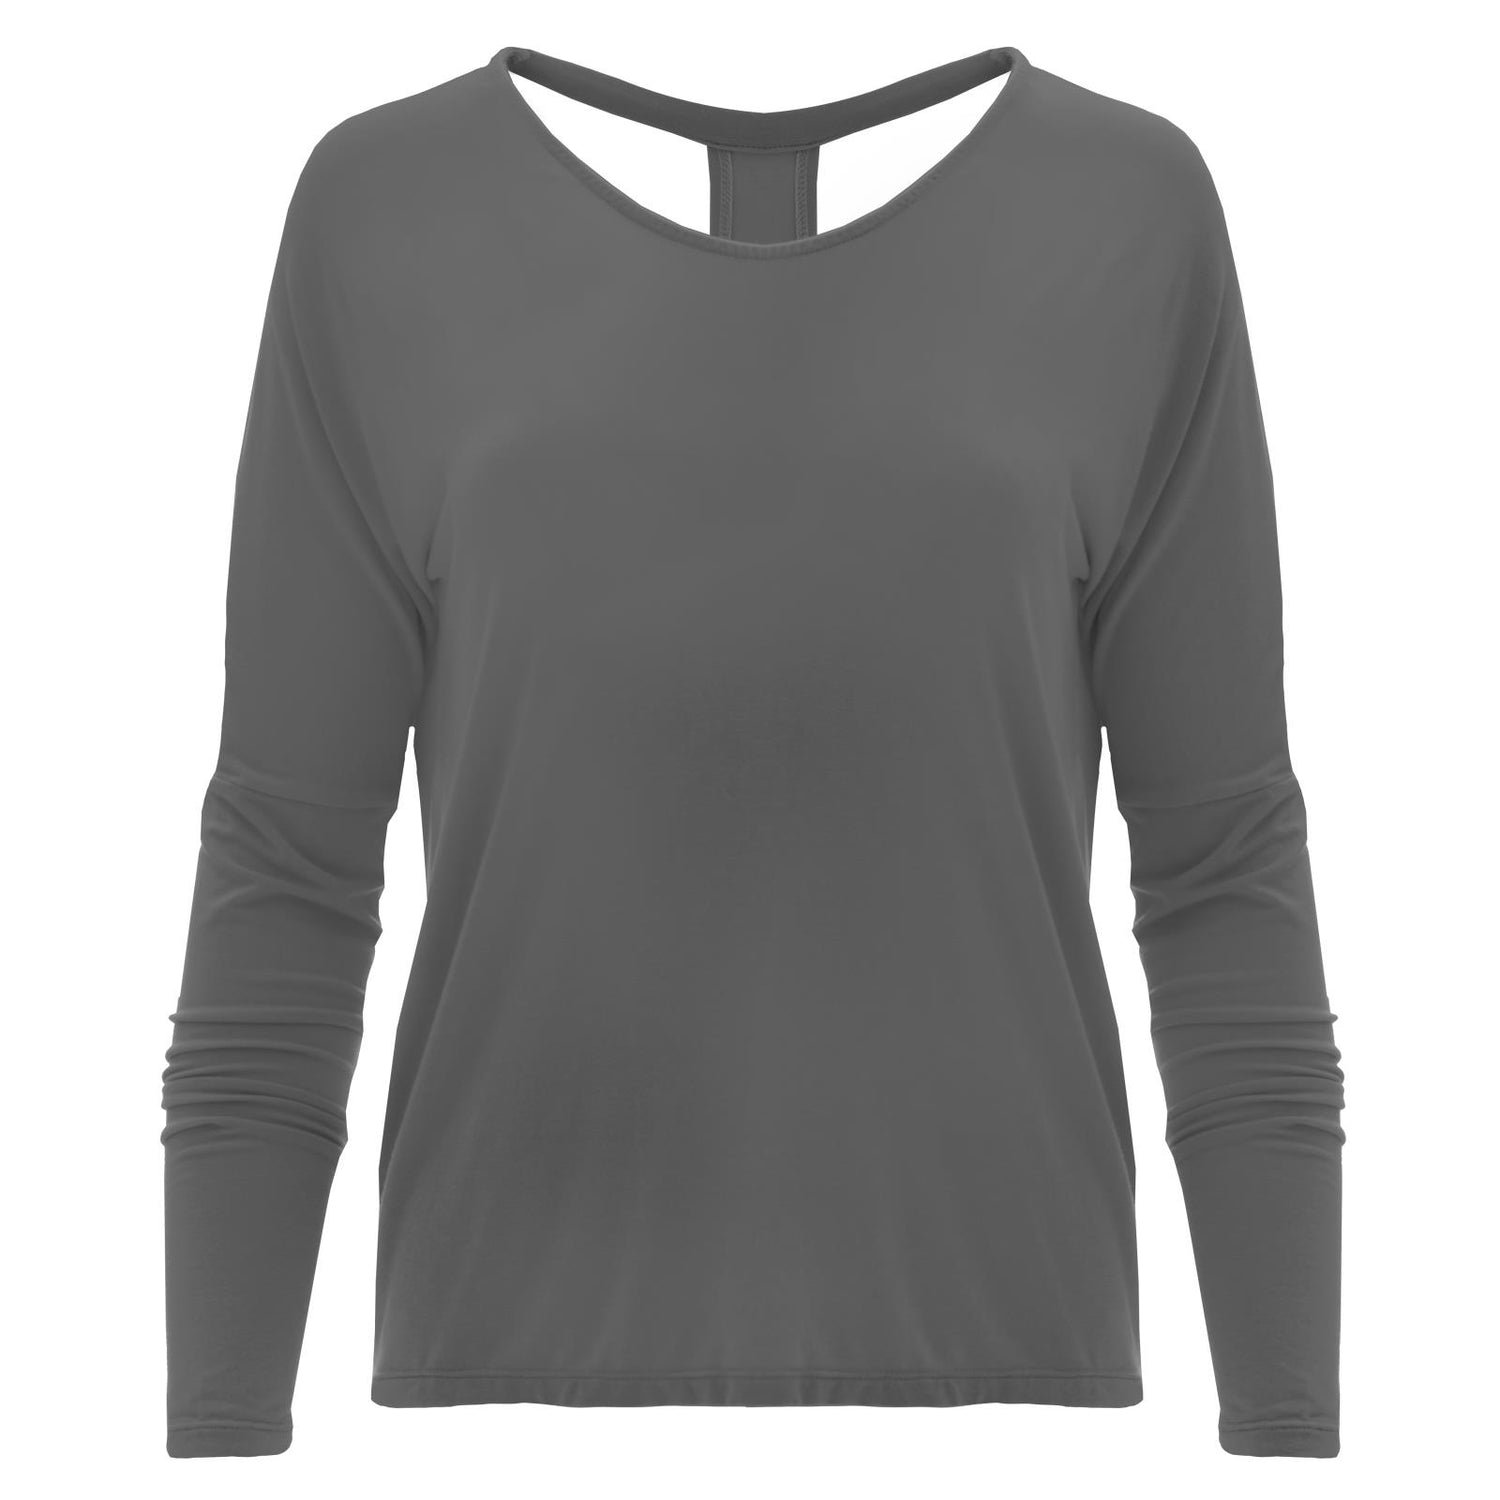 Women's Solid Open Back Top in Pewter